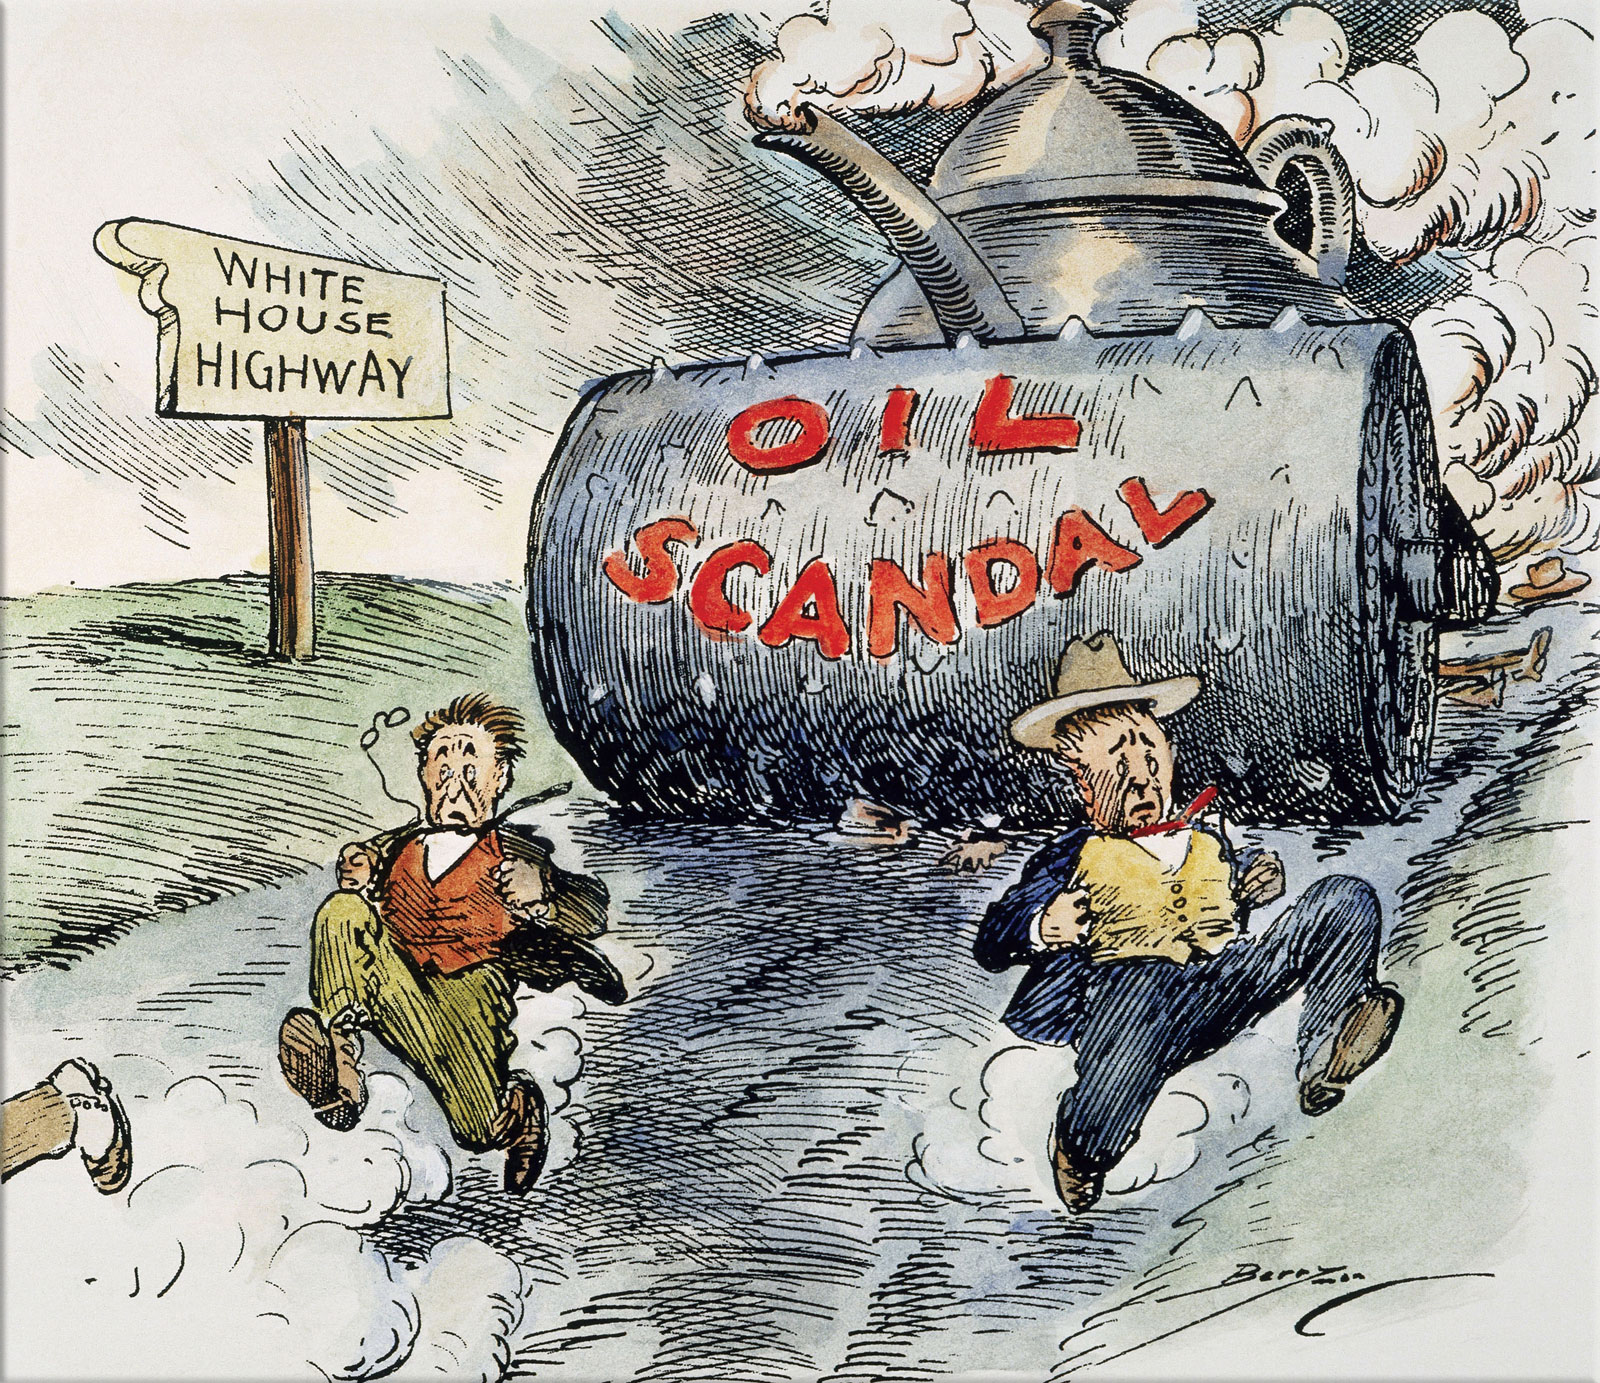 Teapot Dome scandal: A 1924 cartoon shows Washington officials racing down an oil-slicked road to the White House, trying desperately to outpace the Teapot Dome scandal of President Warren G. Harding's administration. credit The Granger Collection, New York